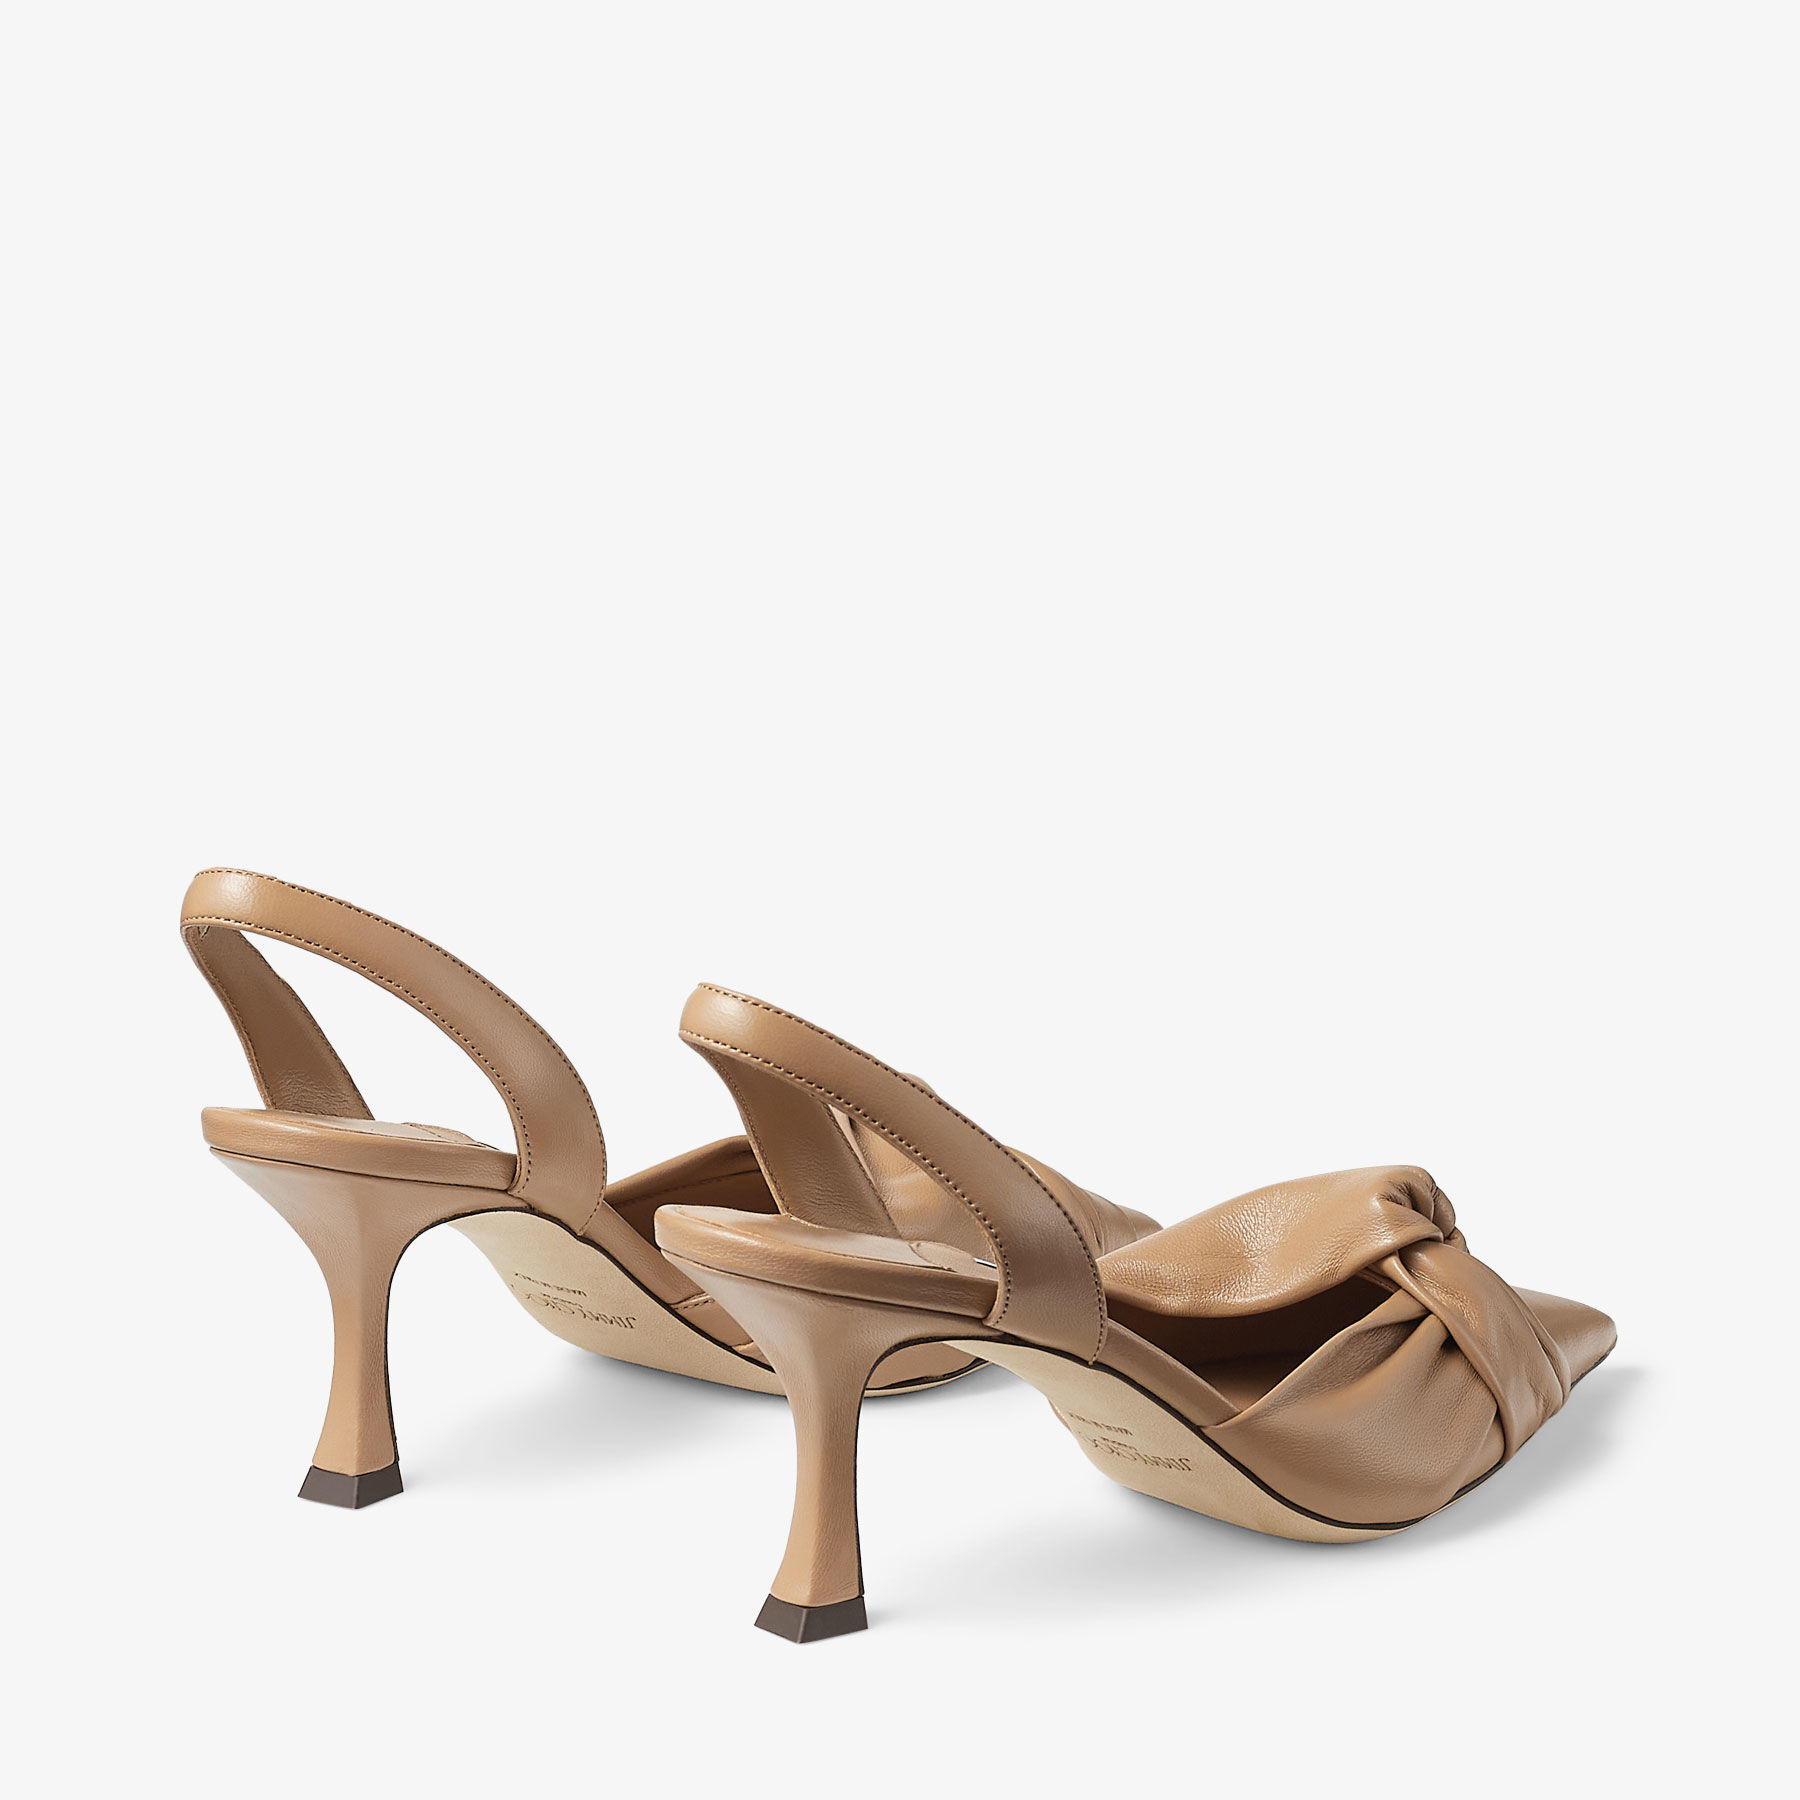 Hedera Sb 70 | Biscuit Nappa Leather Sling Back Pumps | New 